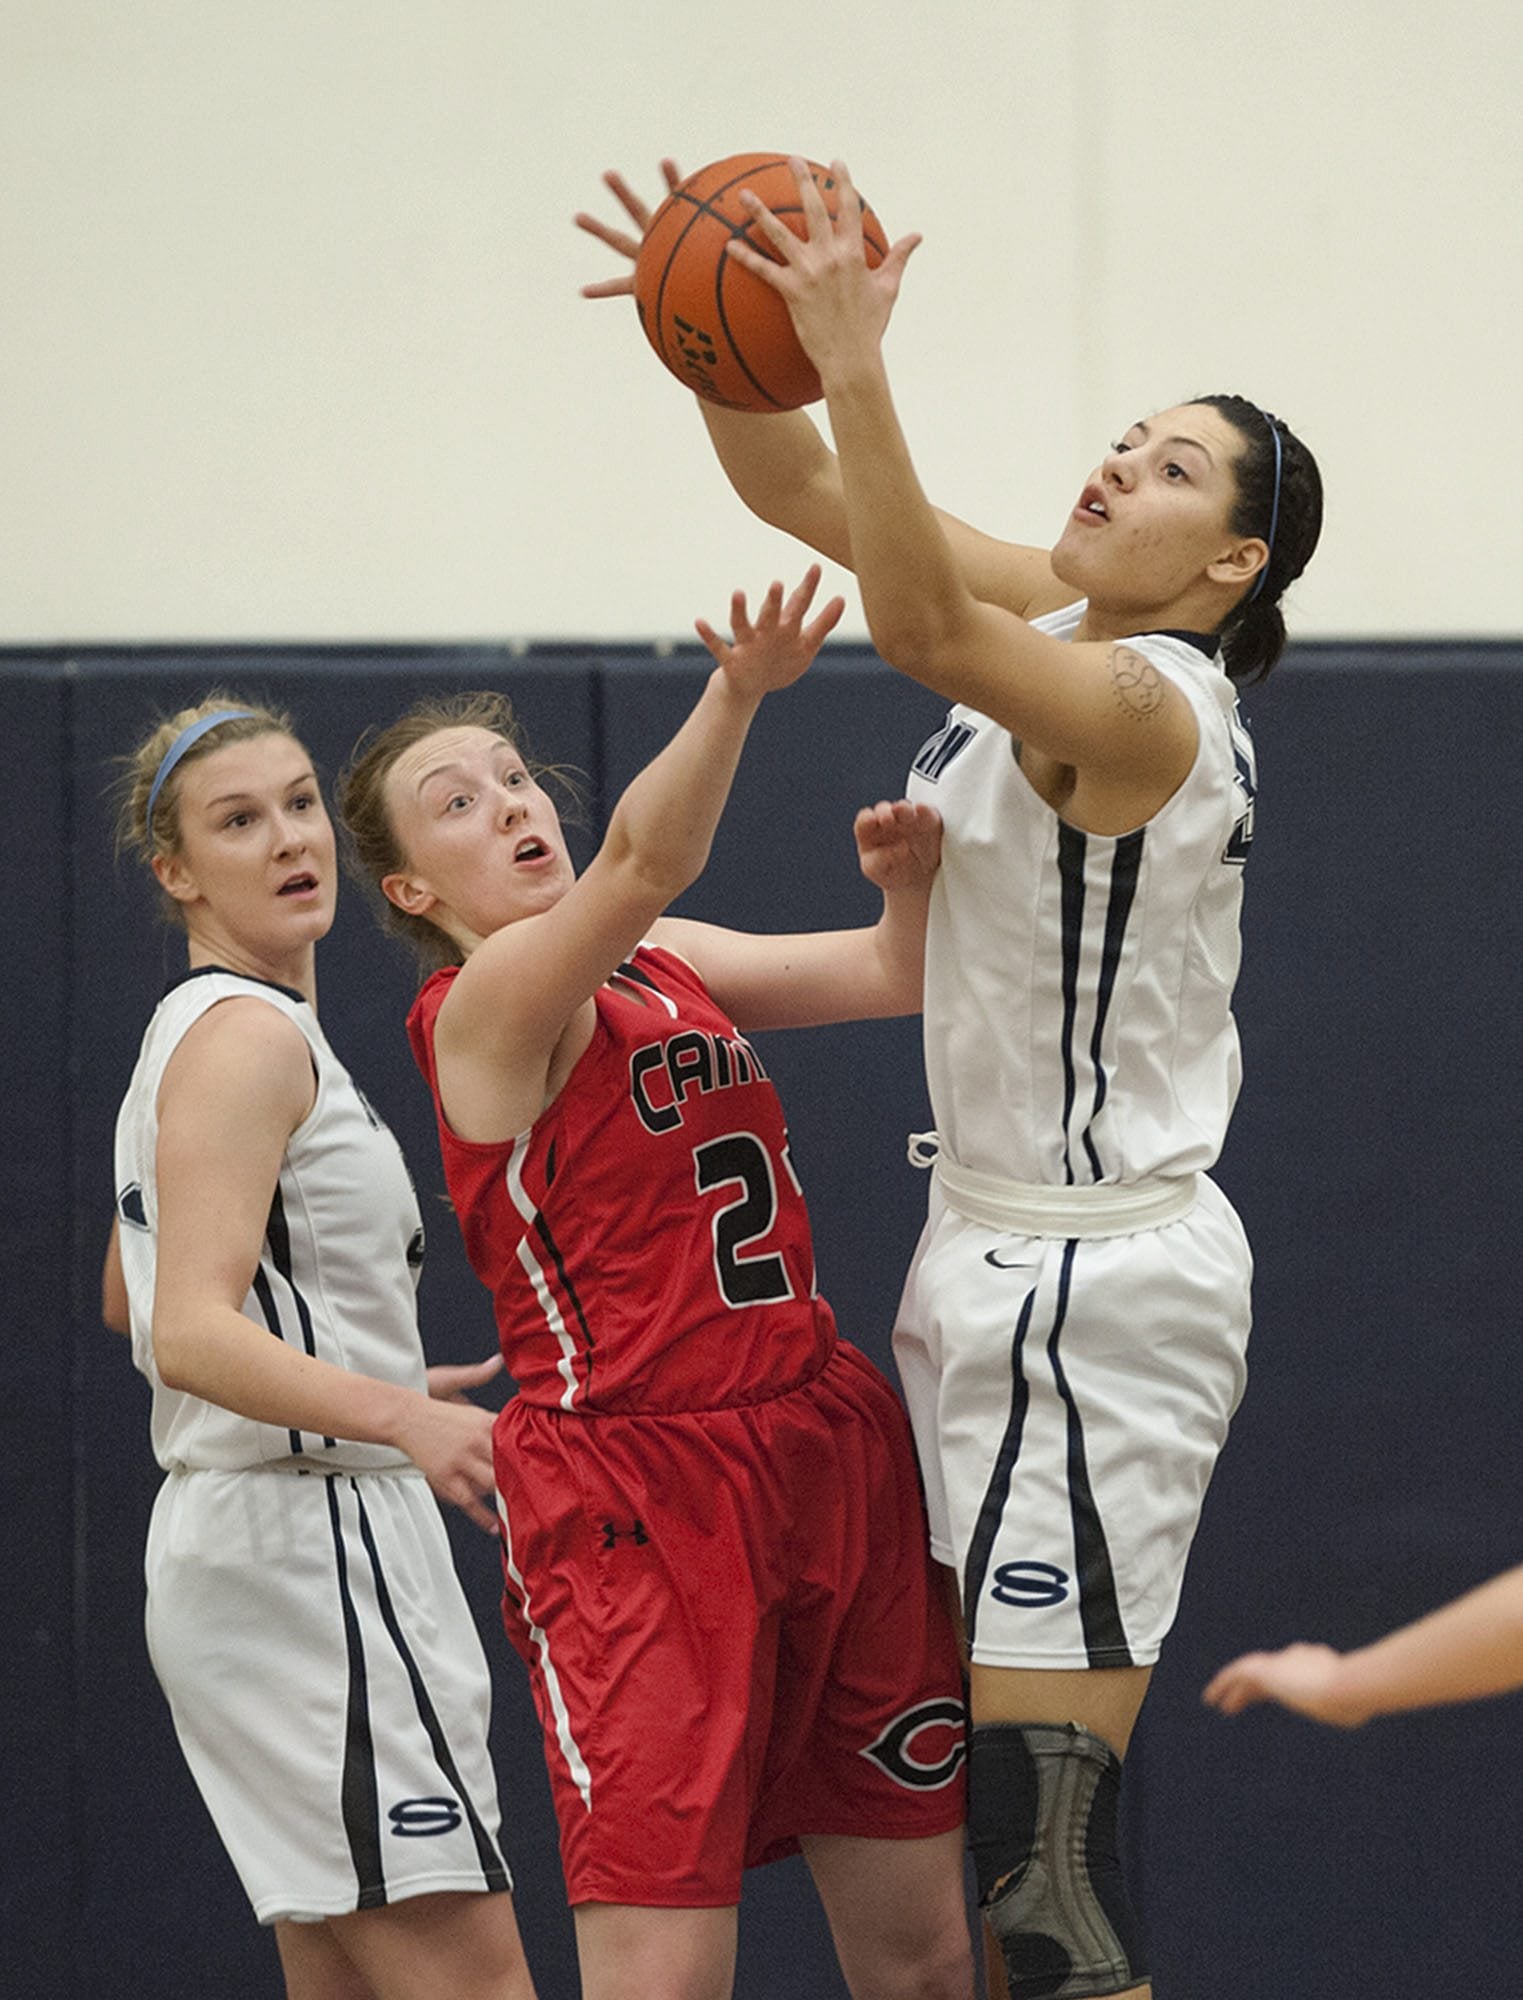 Skyview's Riley Friauf, left, looks on as Camas' Emma Jones (21) and Skyview's Maddie Lord, right, fight for a rebound in the first quarter Tuesday night, Feb. 2, 2016 at Skyview High School gym.